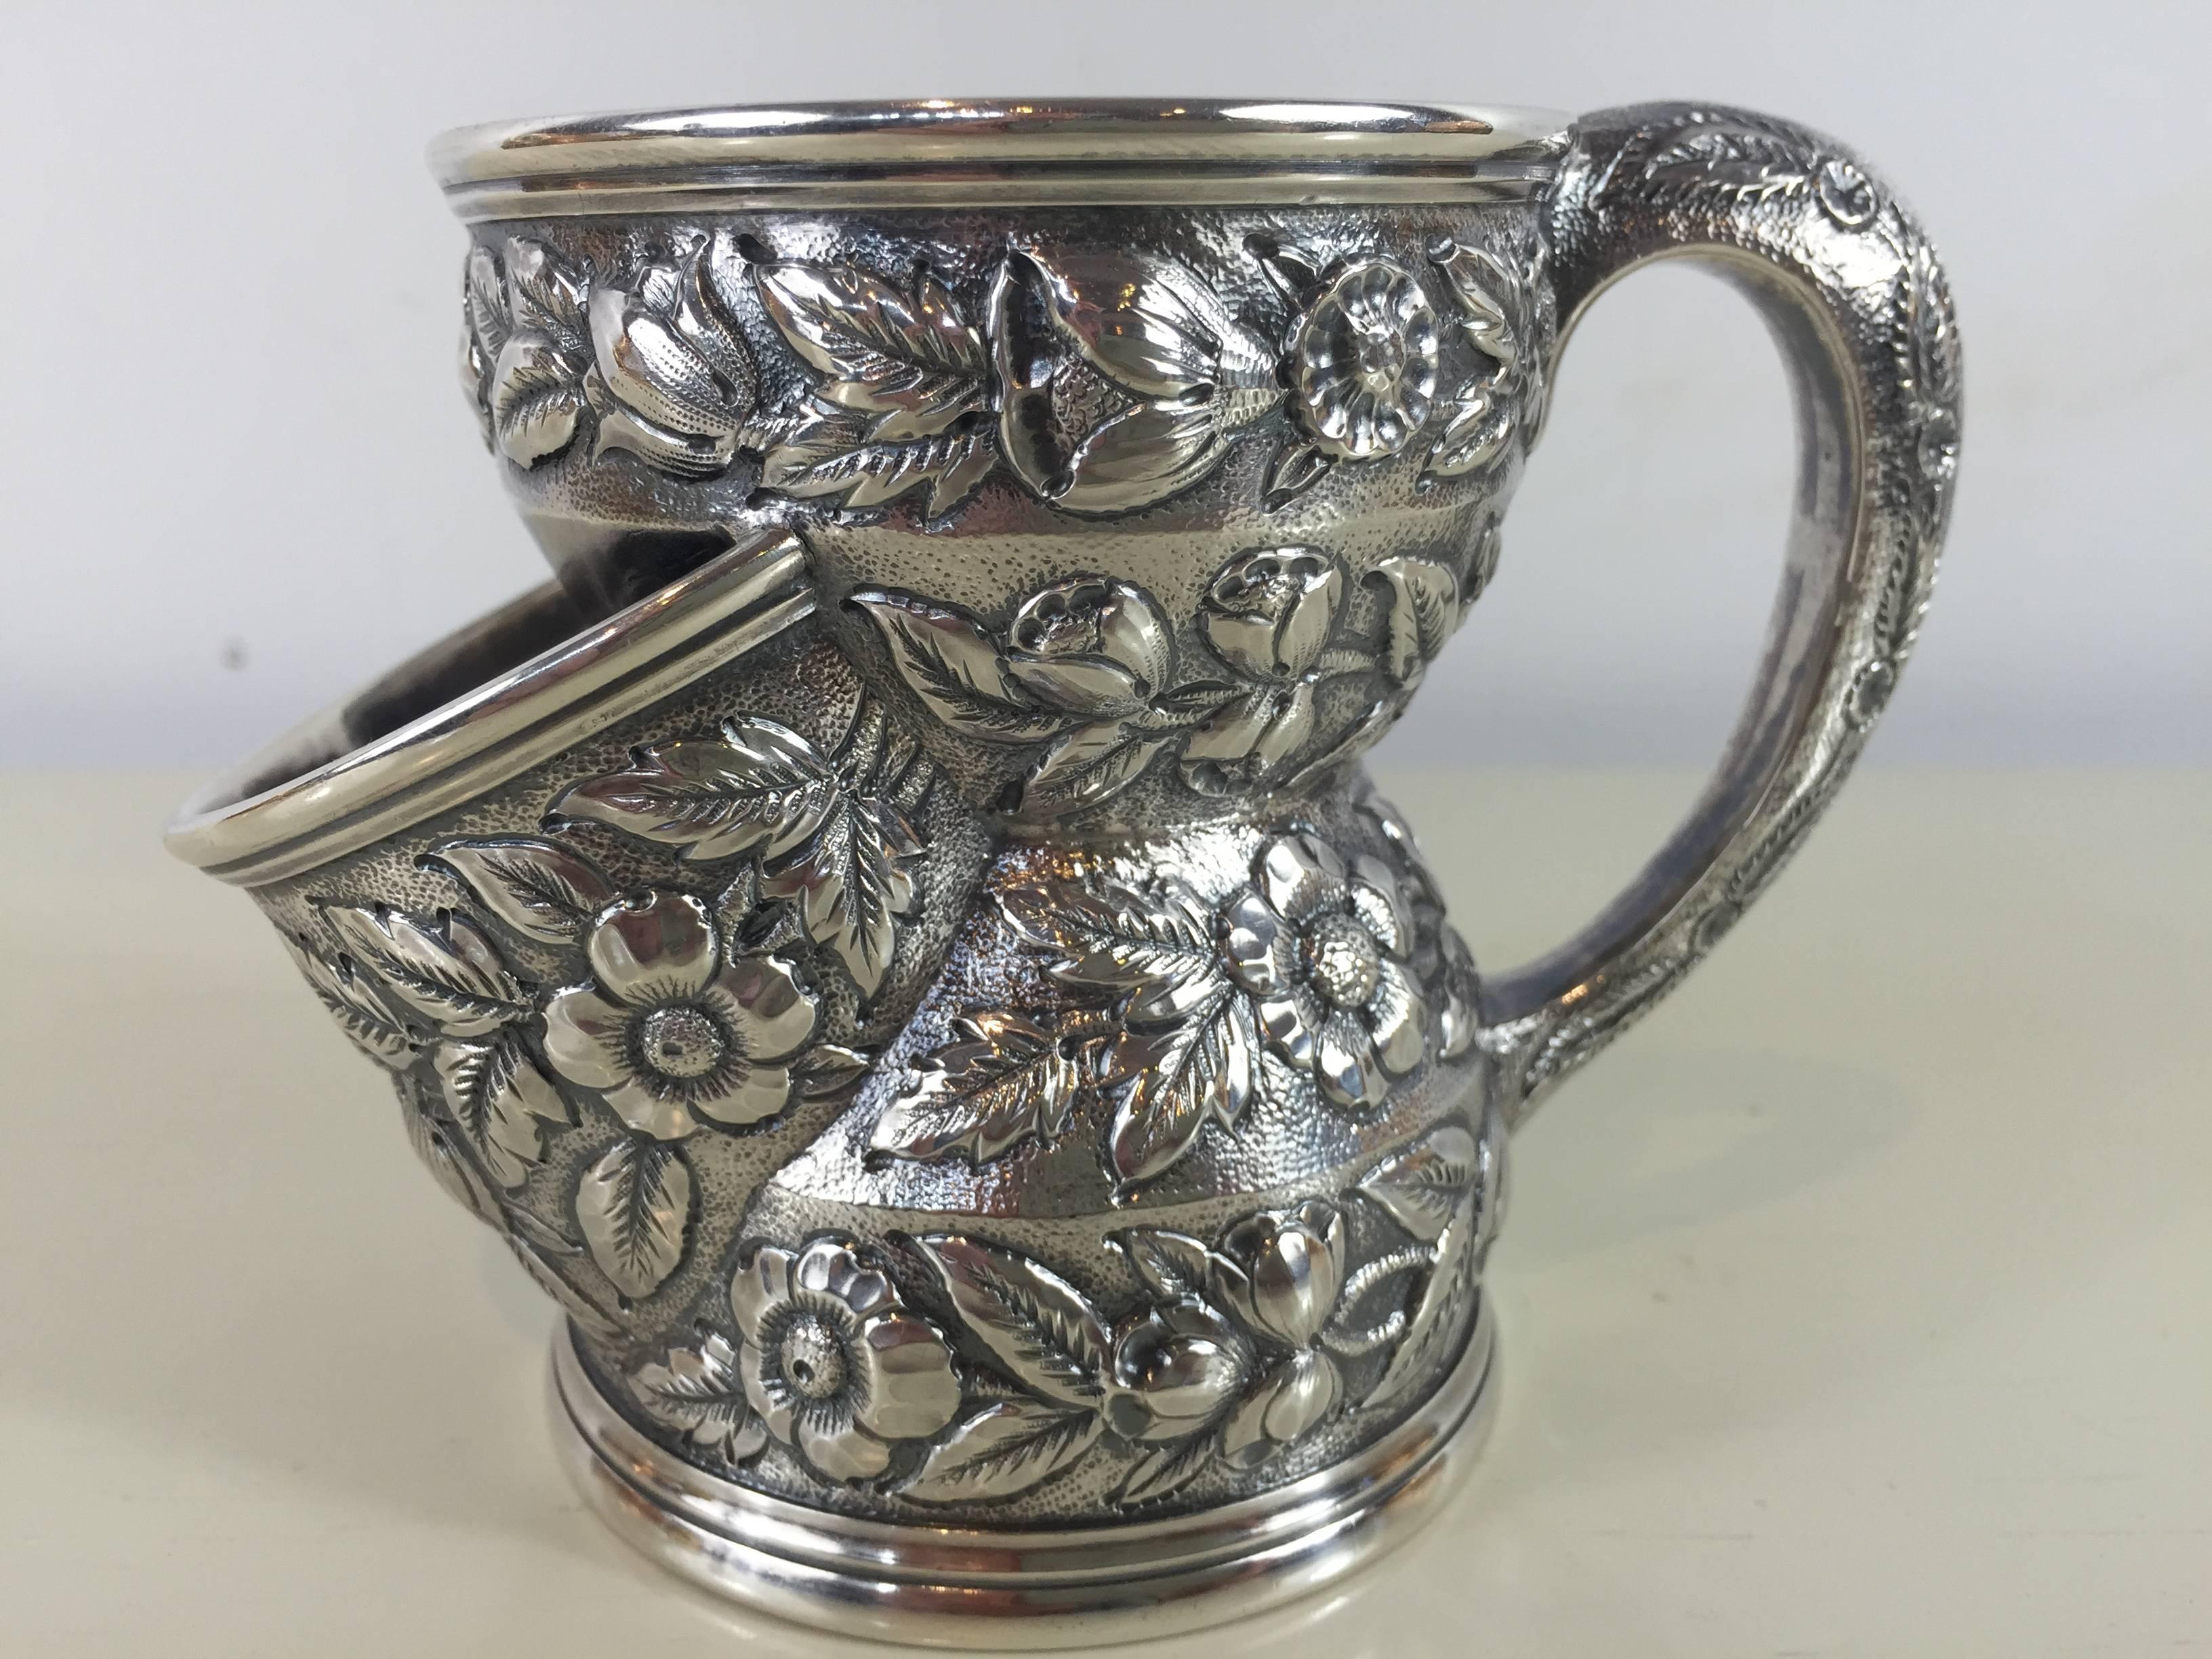 Black Starr & Frost Sterling Repouse Shaving Mug
Impressed Hallmark of Black, Starr & Frost
Rare form, for the man who has everything.
7.2 Troy Ounces
Provenance: 
Hudson Erastus Bridge, (1817-1874)
The last picture in the images a photograph